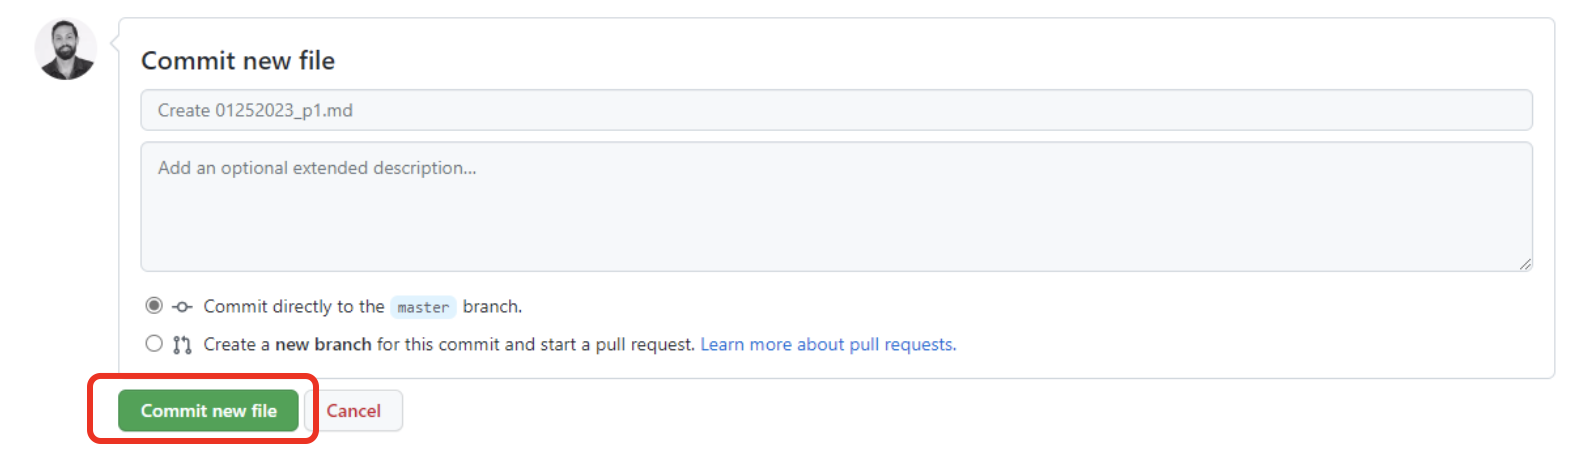 Screenshot of GitHub page highlighting the Commit new file button on the bottom left.